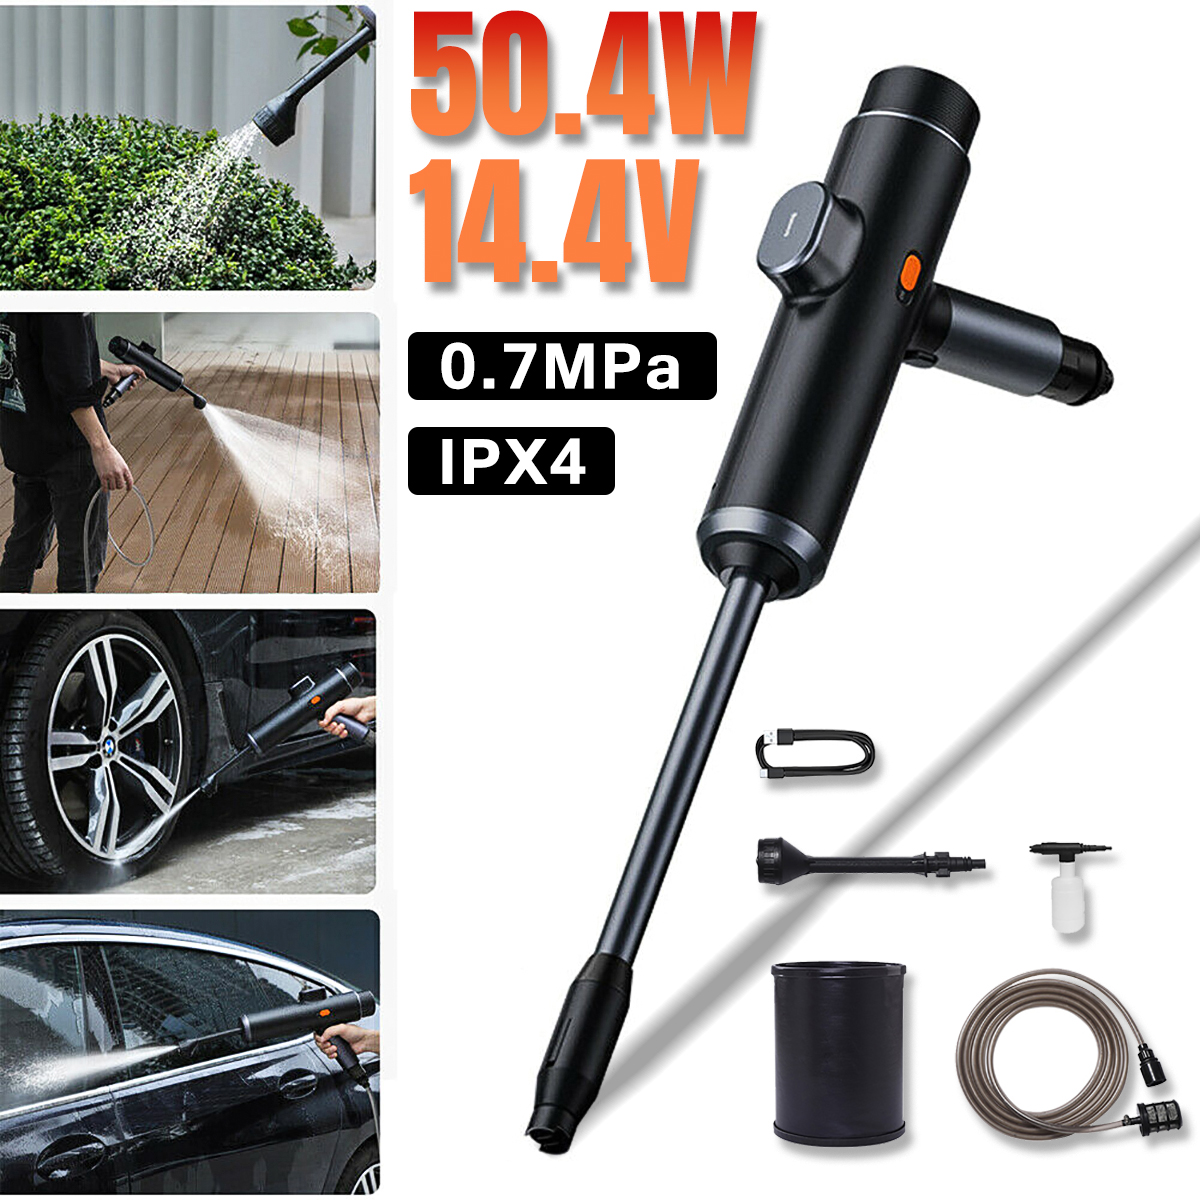 Display-Portable-Cordless-High-Pressure-Washer-Machine-USB-Rechargeable-Electric-Car-Washing-Water-S-1861681-3